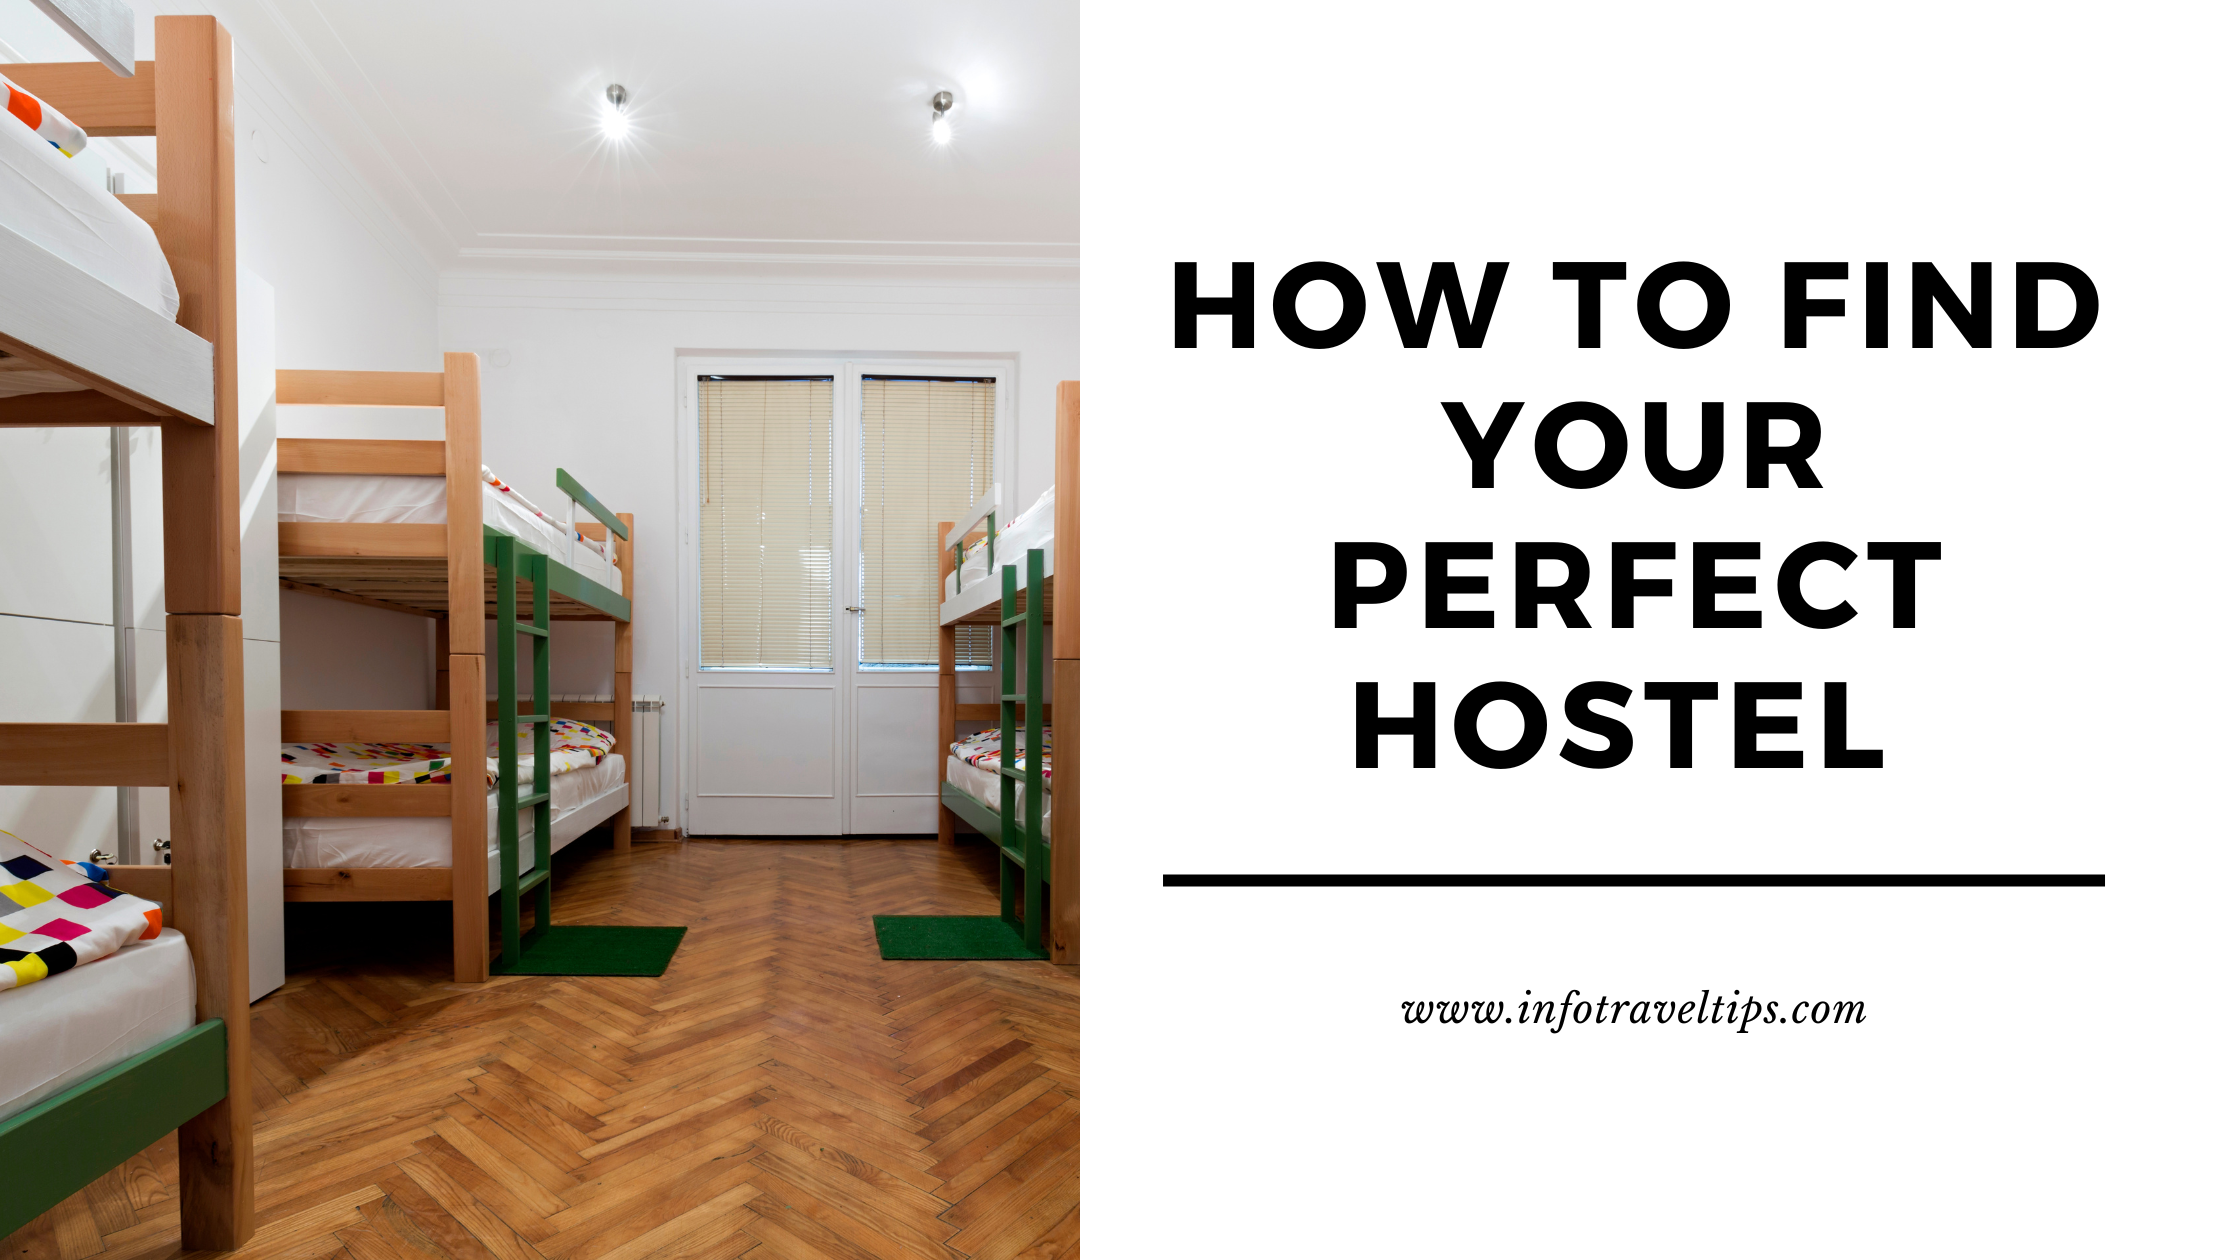 How To Find Your Perfect Hostel That’s In The Heart Of It All